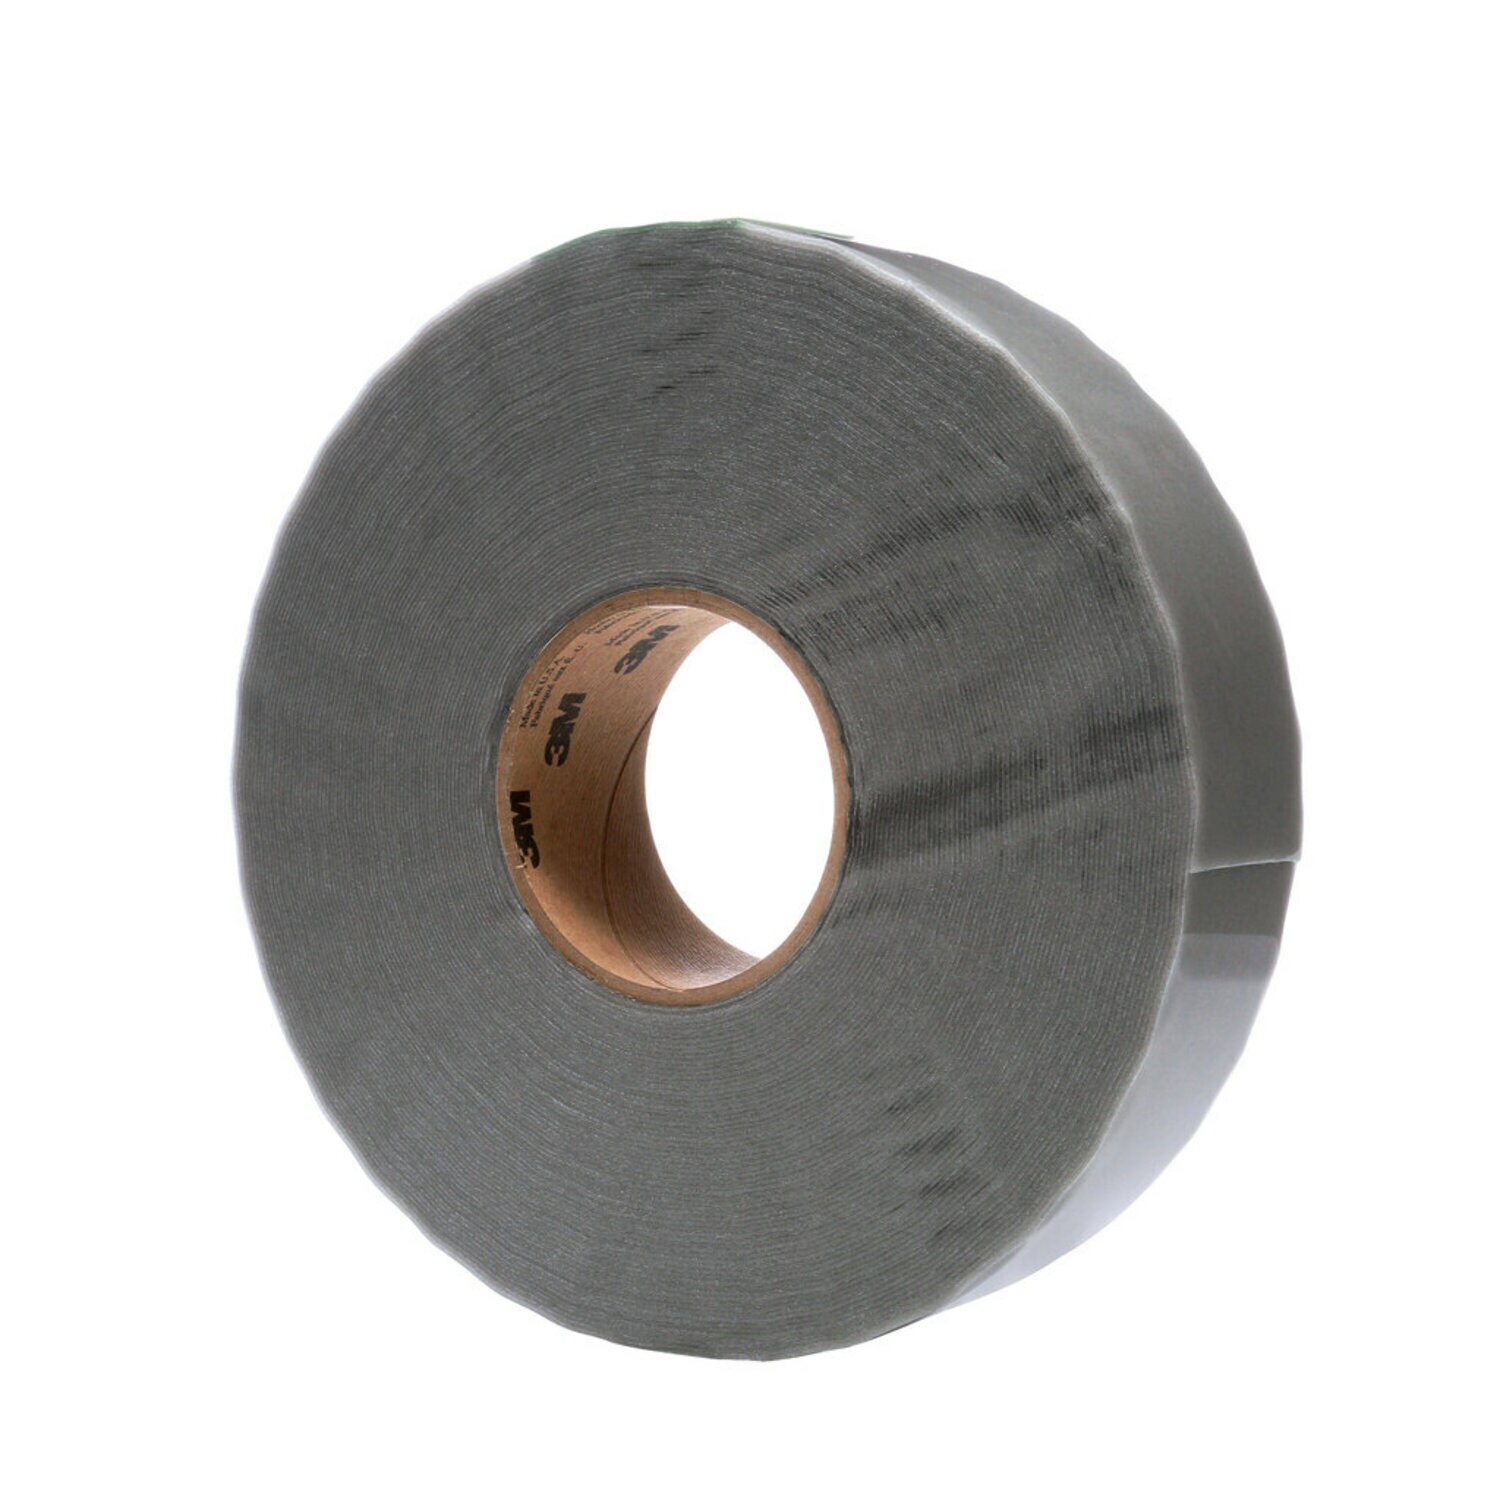 7000049662 - 3M Extreme Sealing Tape 4411G, Gray, 2 in x 36 yd, 40 mil, 6 rolls per
case